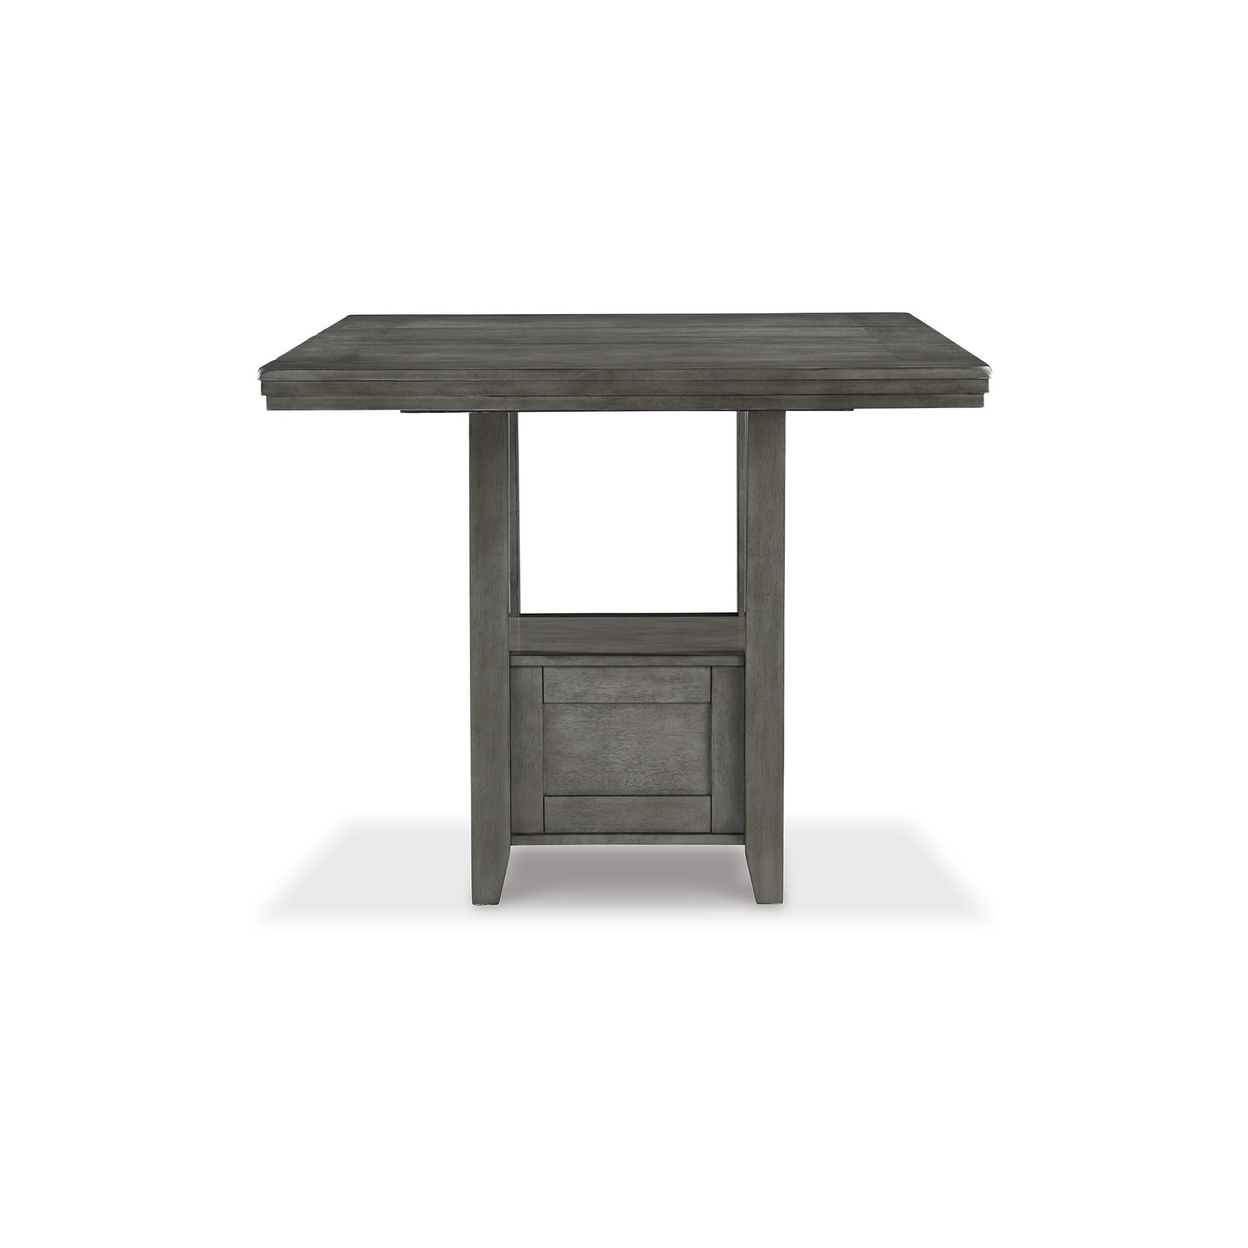 60 Inch Counter Height Table, Single Shelf, Extension Leaf, Weathered Gray- Saltoro Sherpi